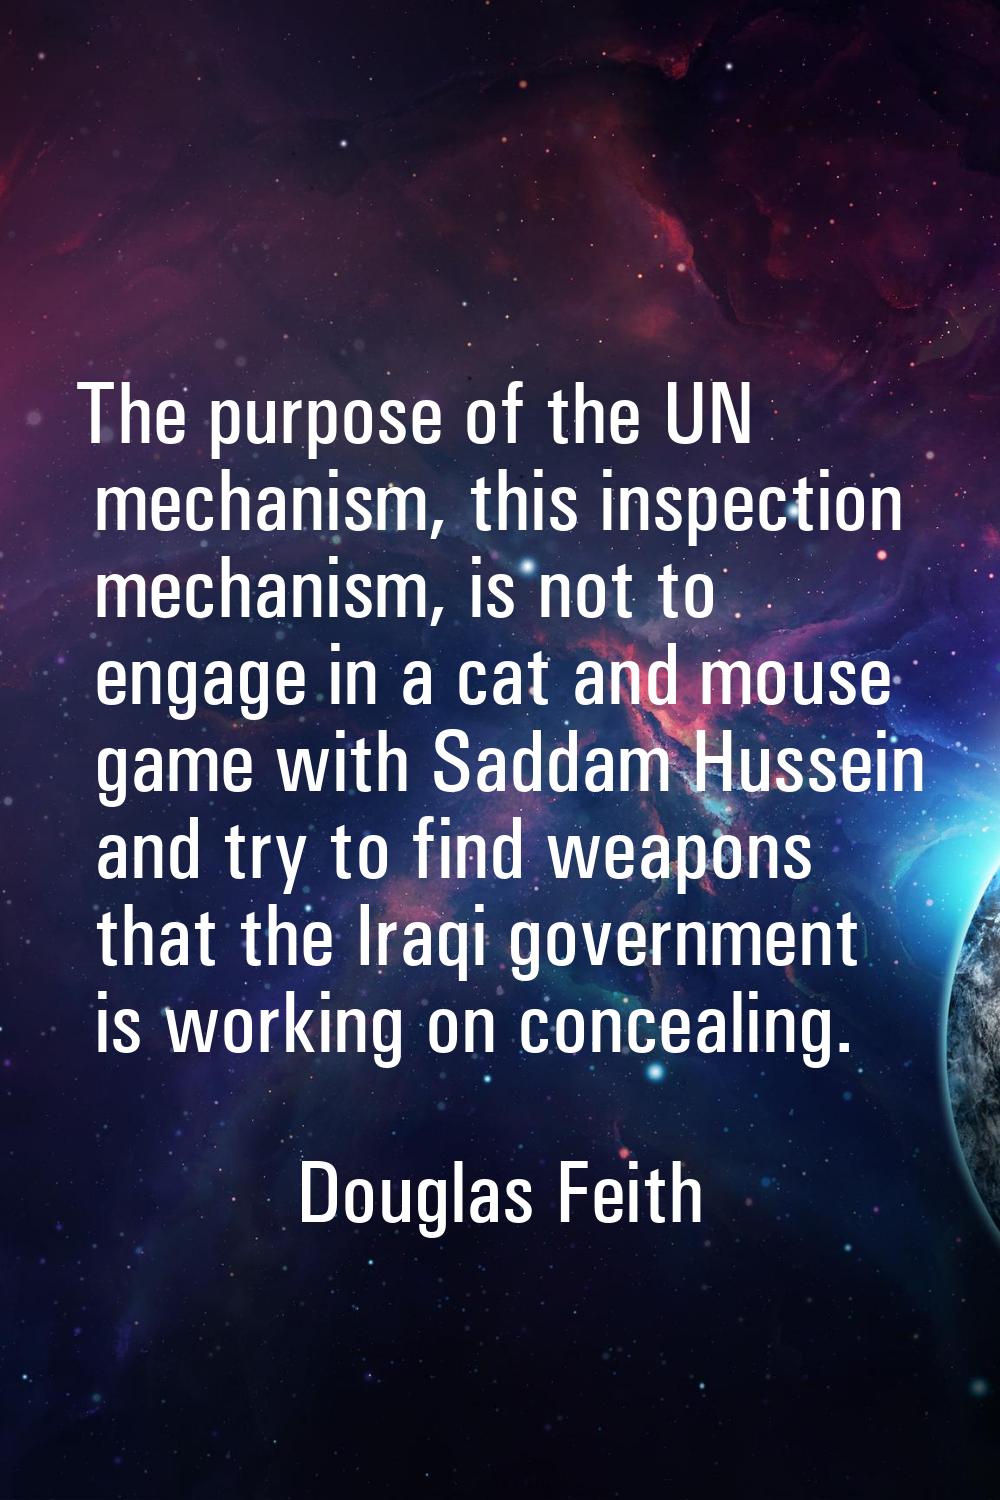 The purpose of the UN mechanism, this inspection mechanism, is not to engage in a cat and mouse gam